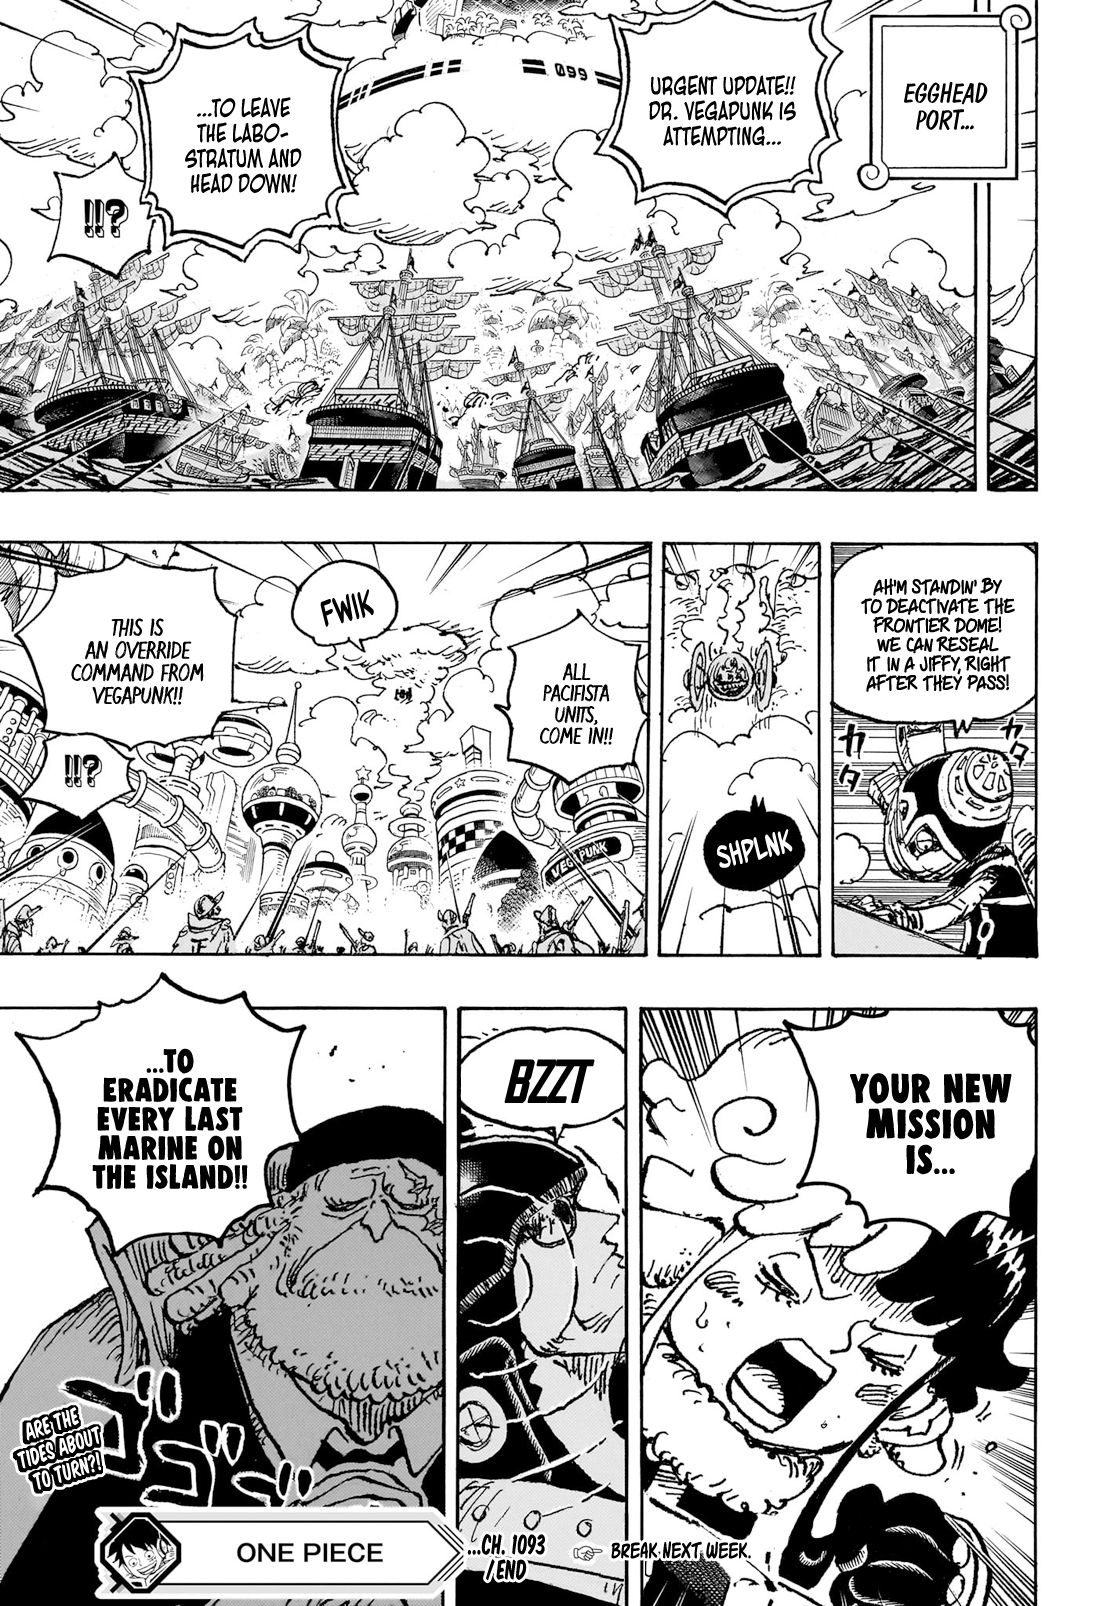 Spoiler - One Piece Chapter 1059 Spoilers Discussion, Page 874